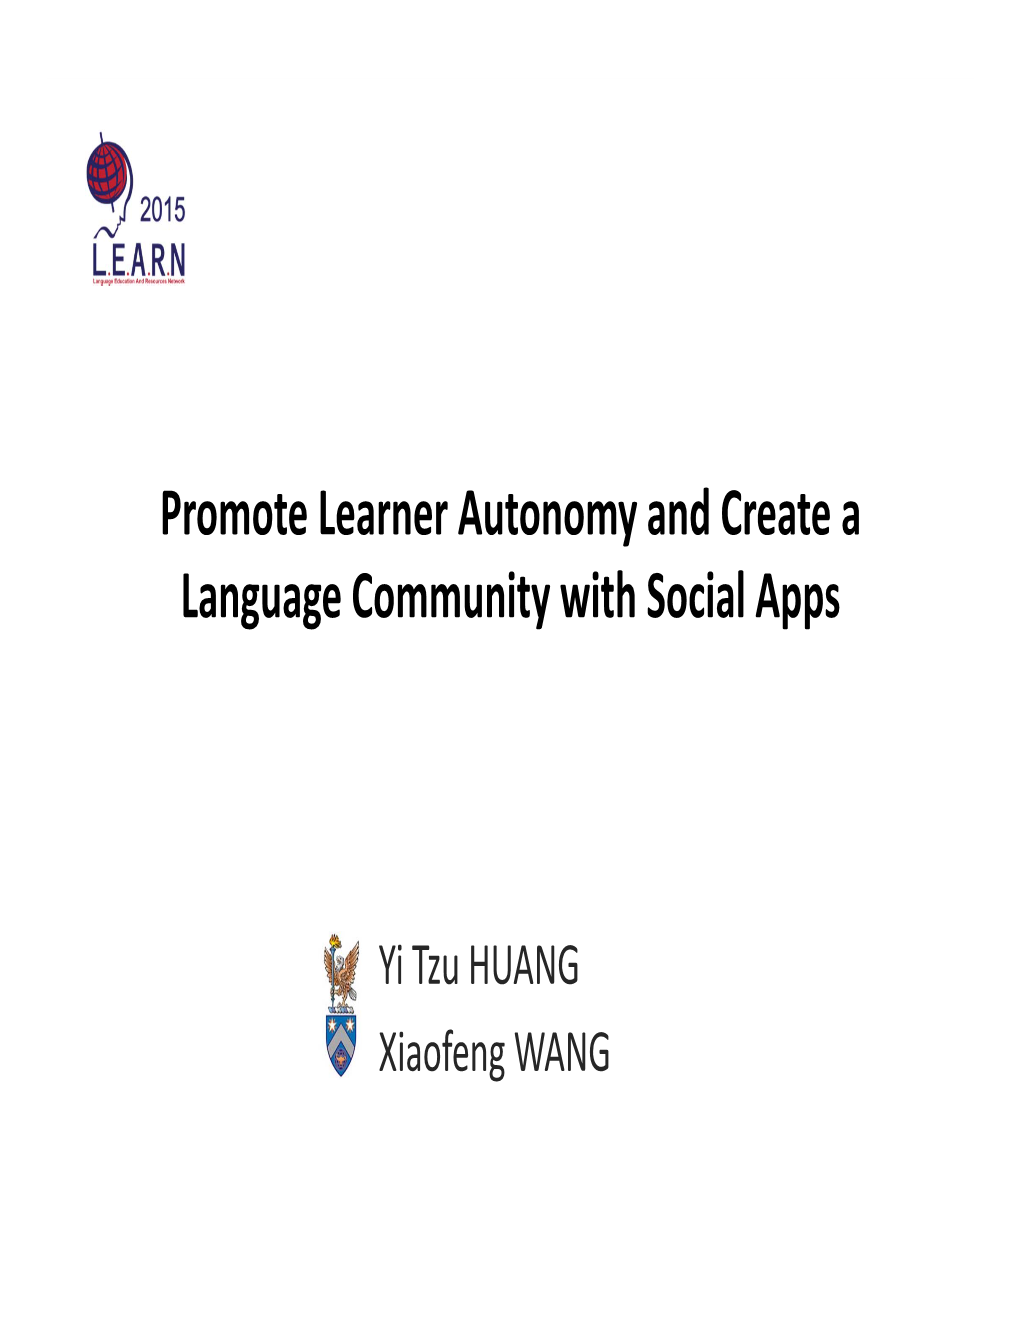 Promote Learner Autonomy and Create a Language Community with Social Apps